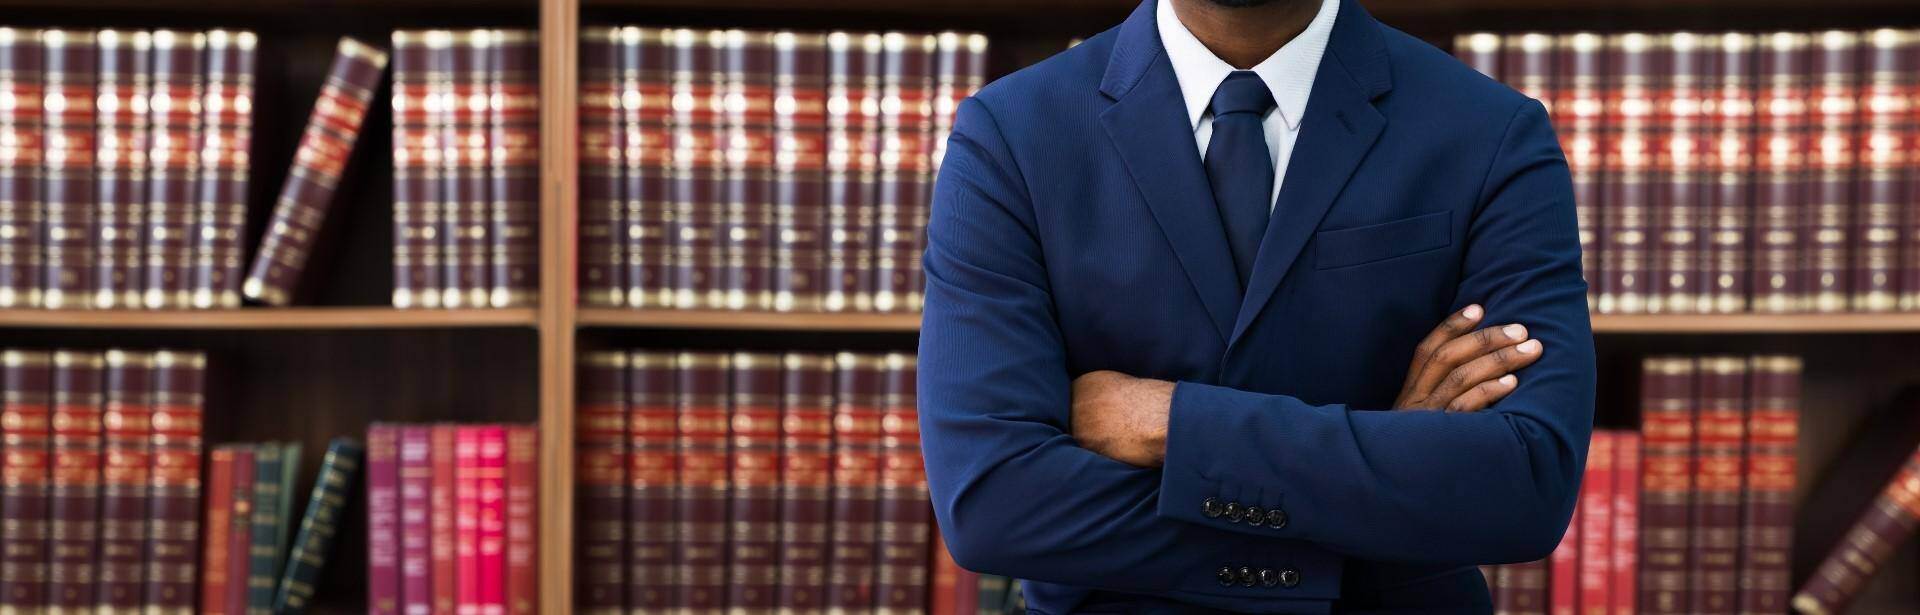 A black lawyer standing in front of a bookshelf of law book in Acworth, Georgia